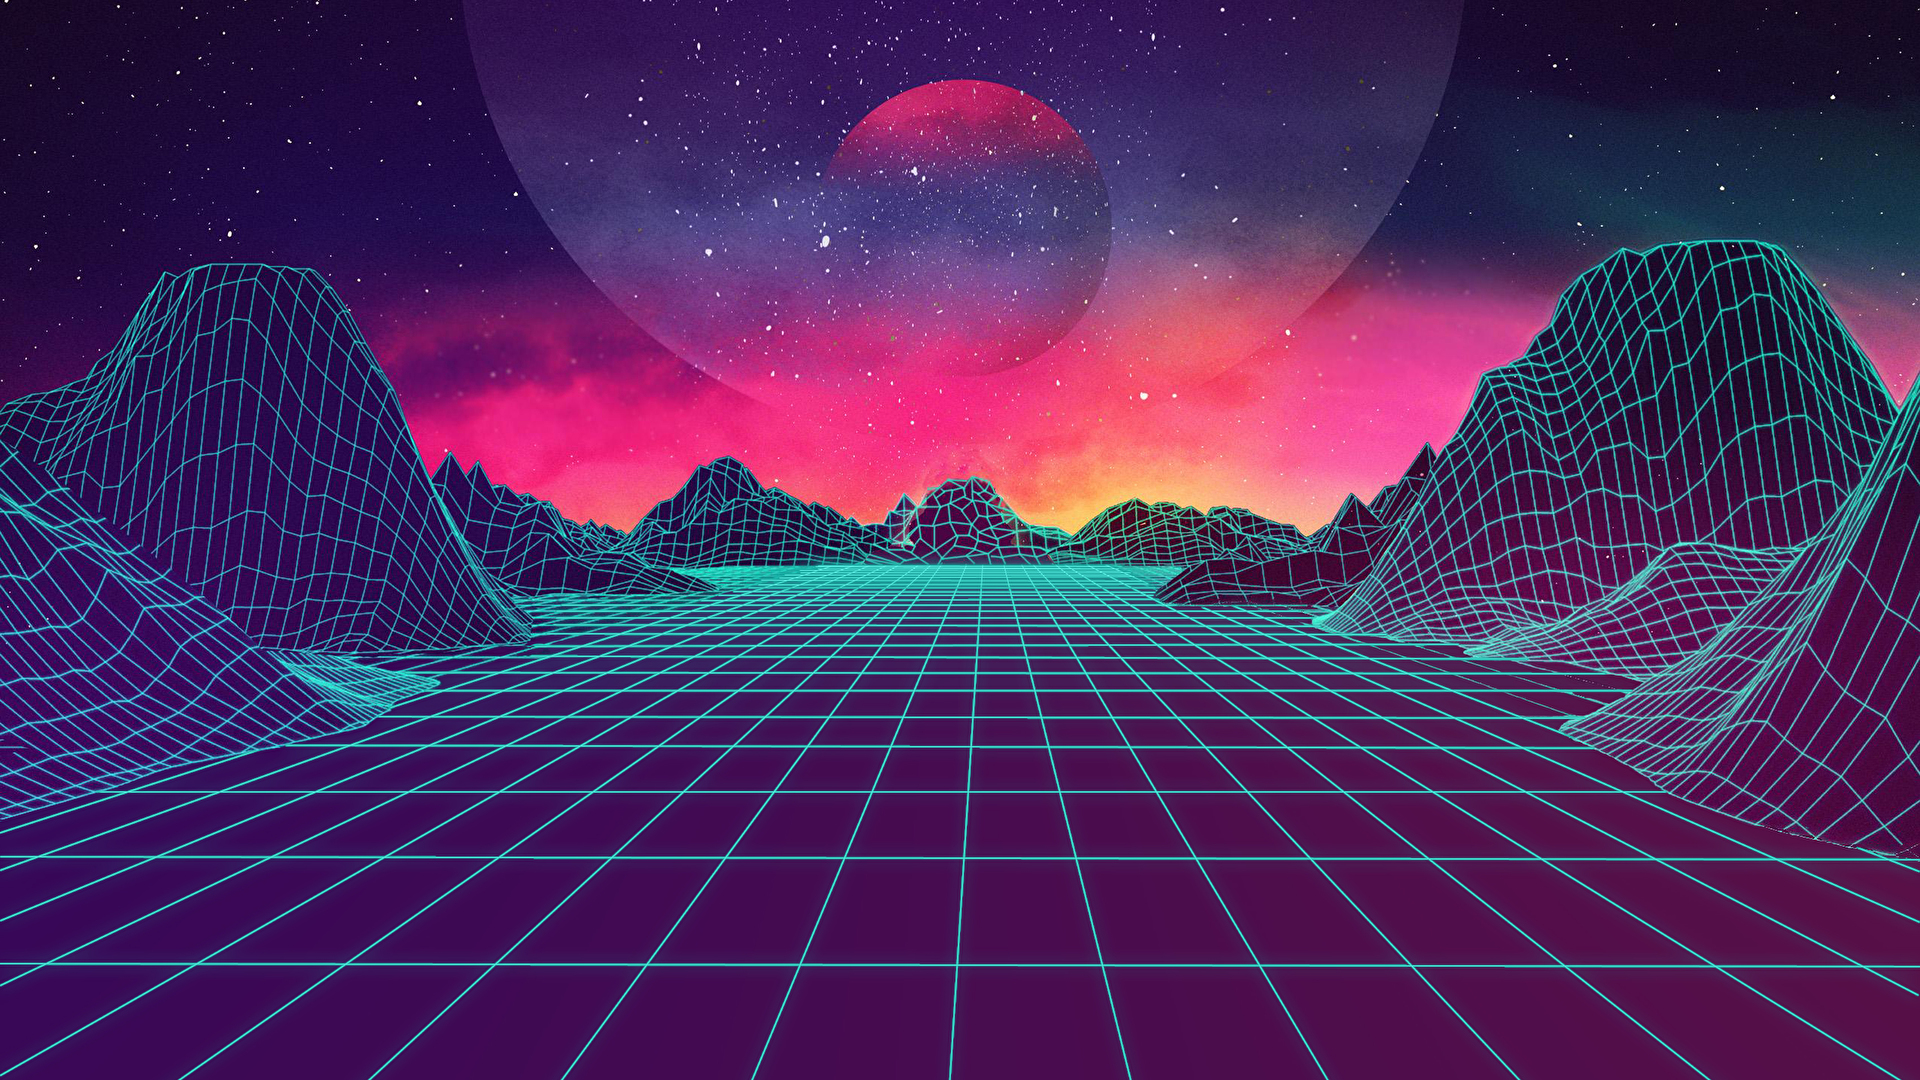 Outrun inspired virtual landscape 1920 × 1080